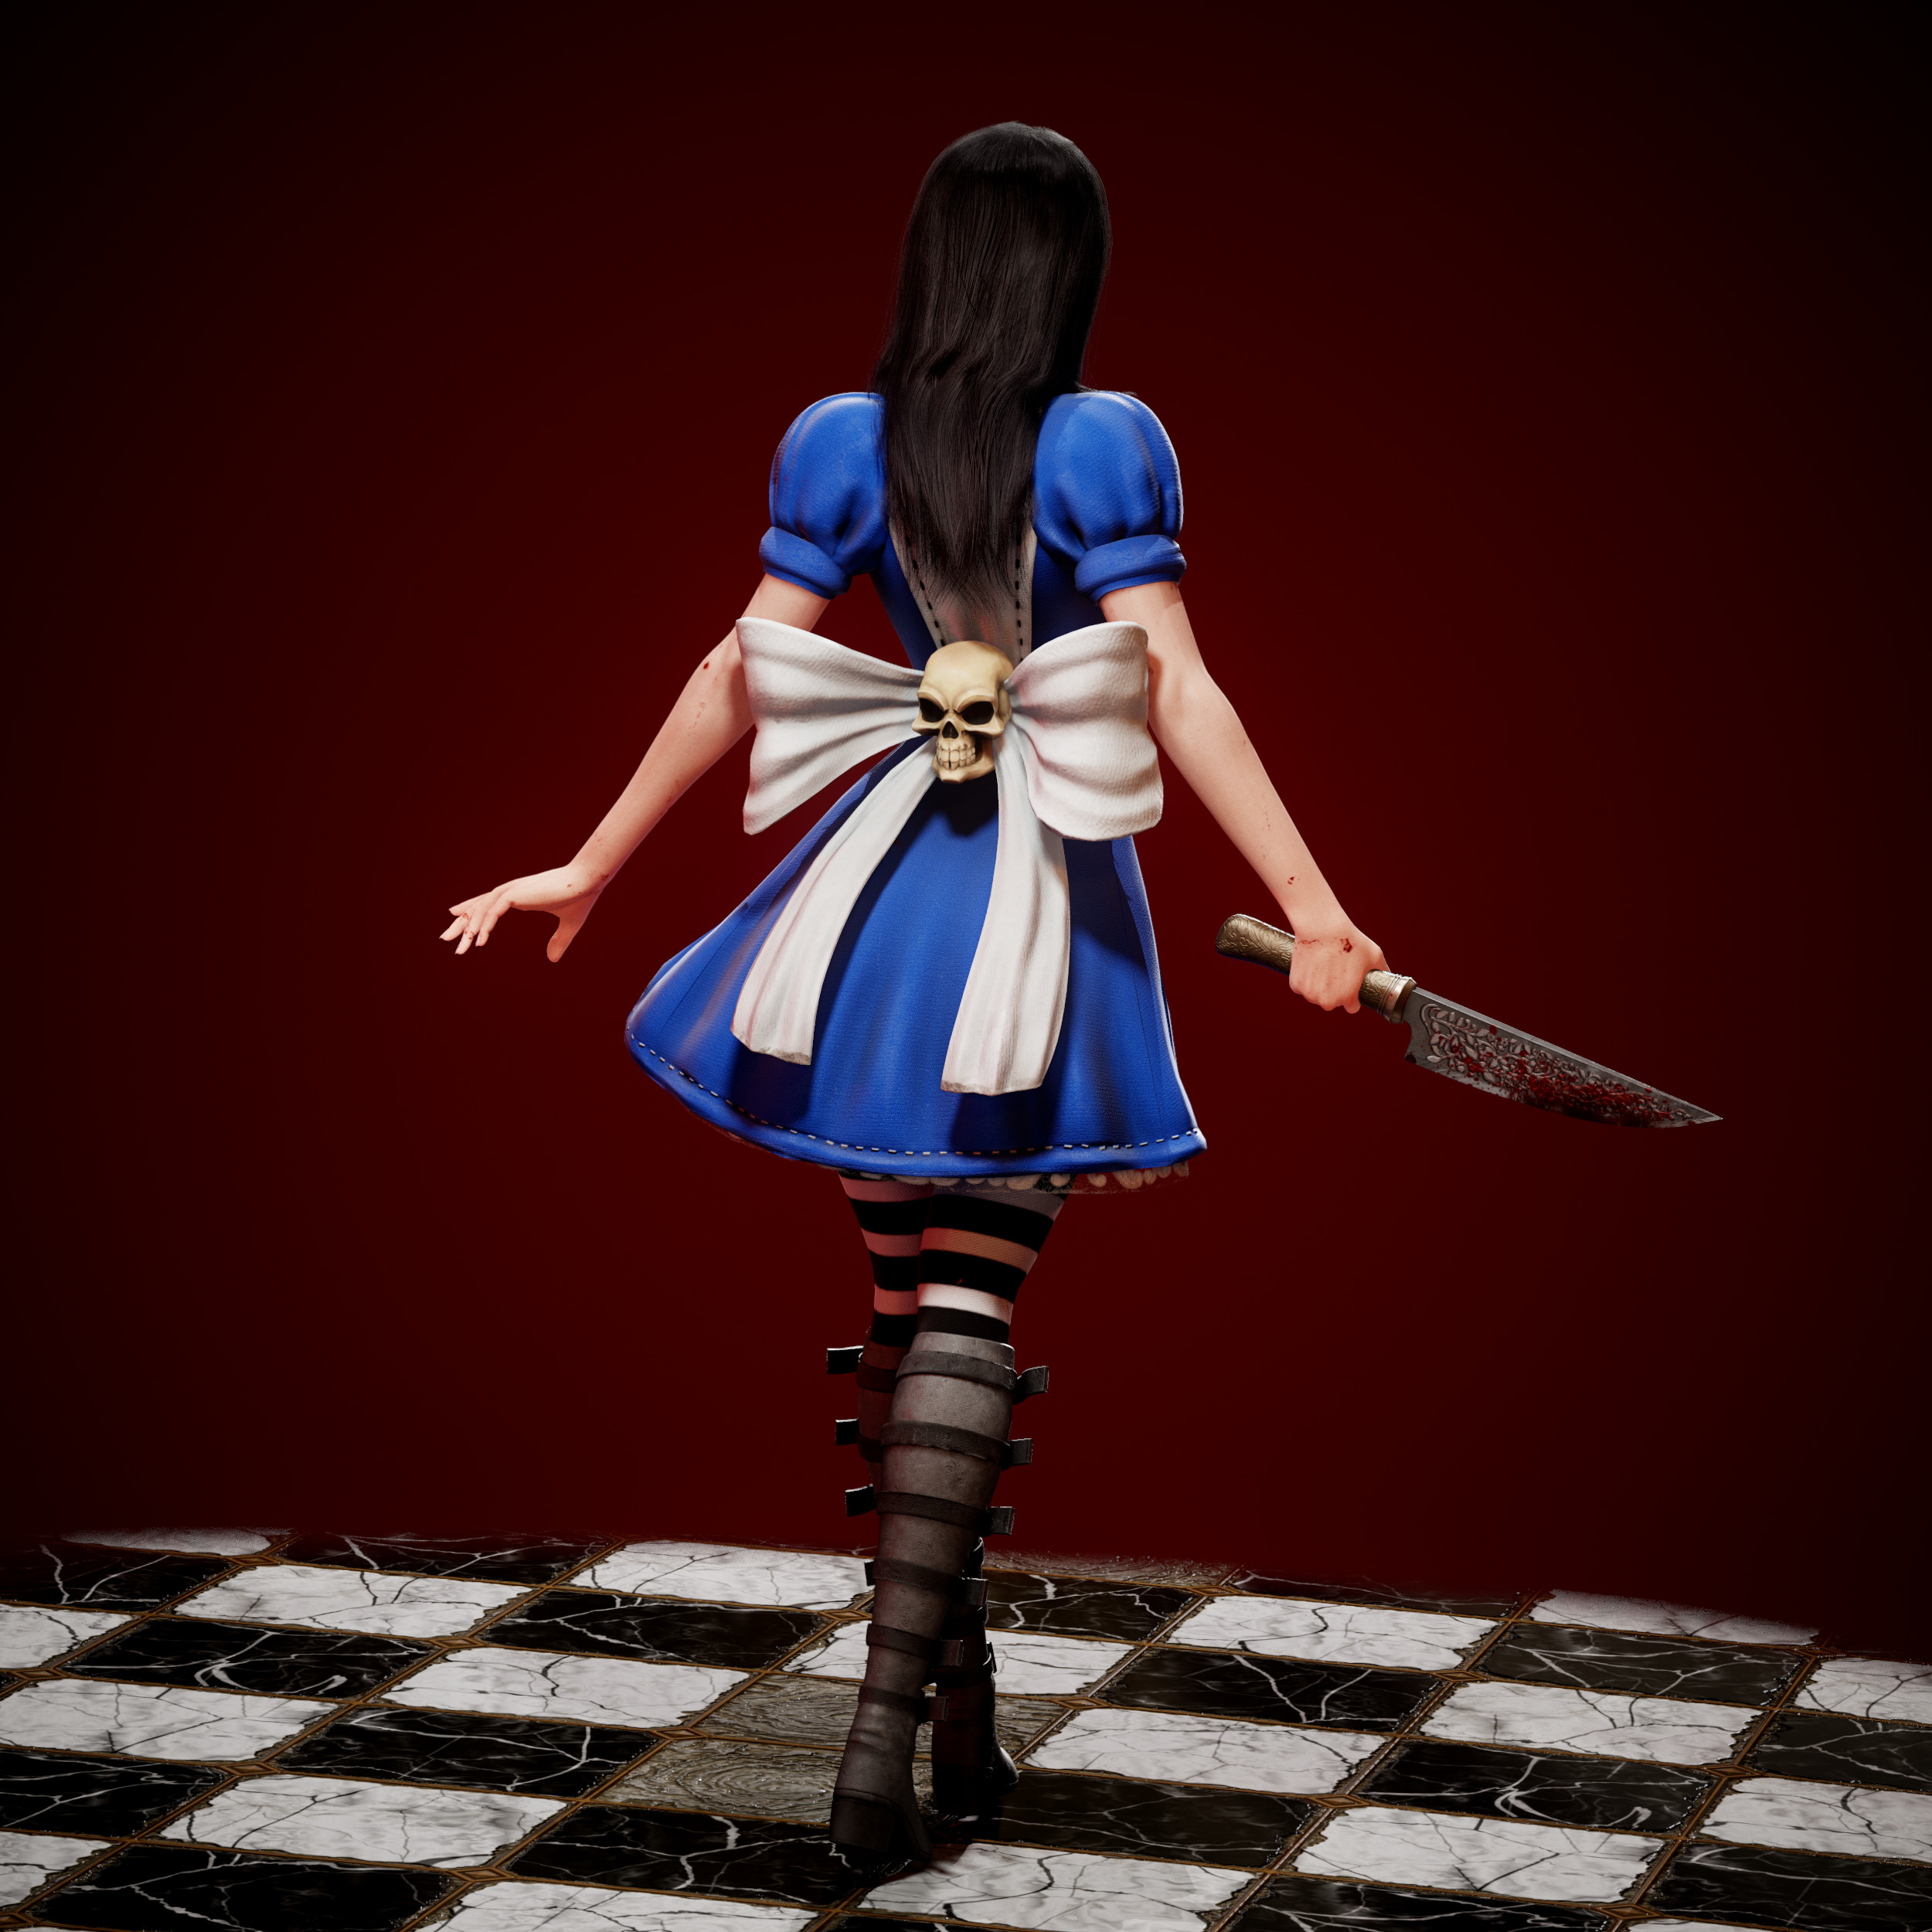 Recreating American McGee's Alice in ZBrush